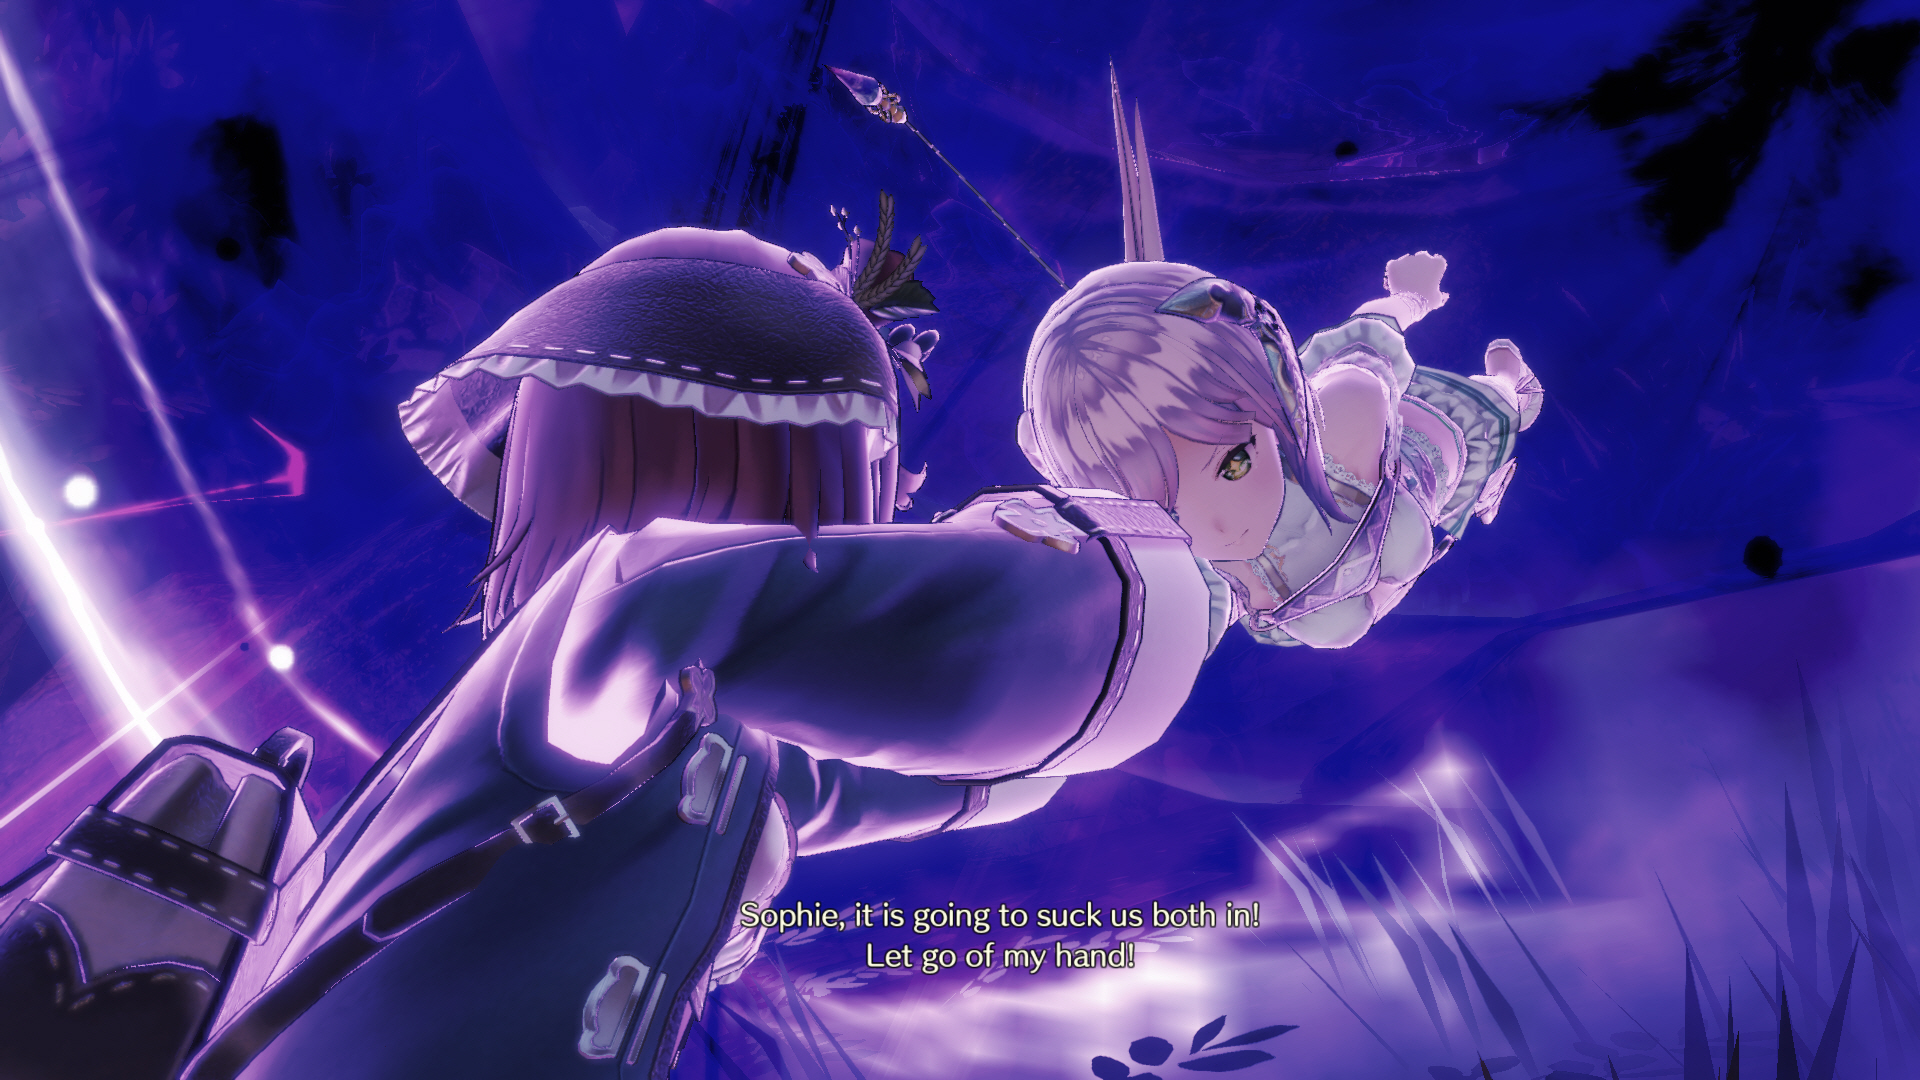 Atelier sophie 2 the alchemist of the mysterious dream screenshot 1 2